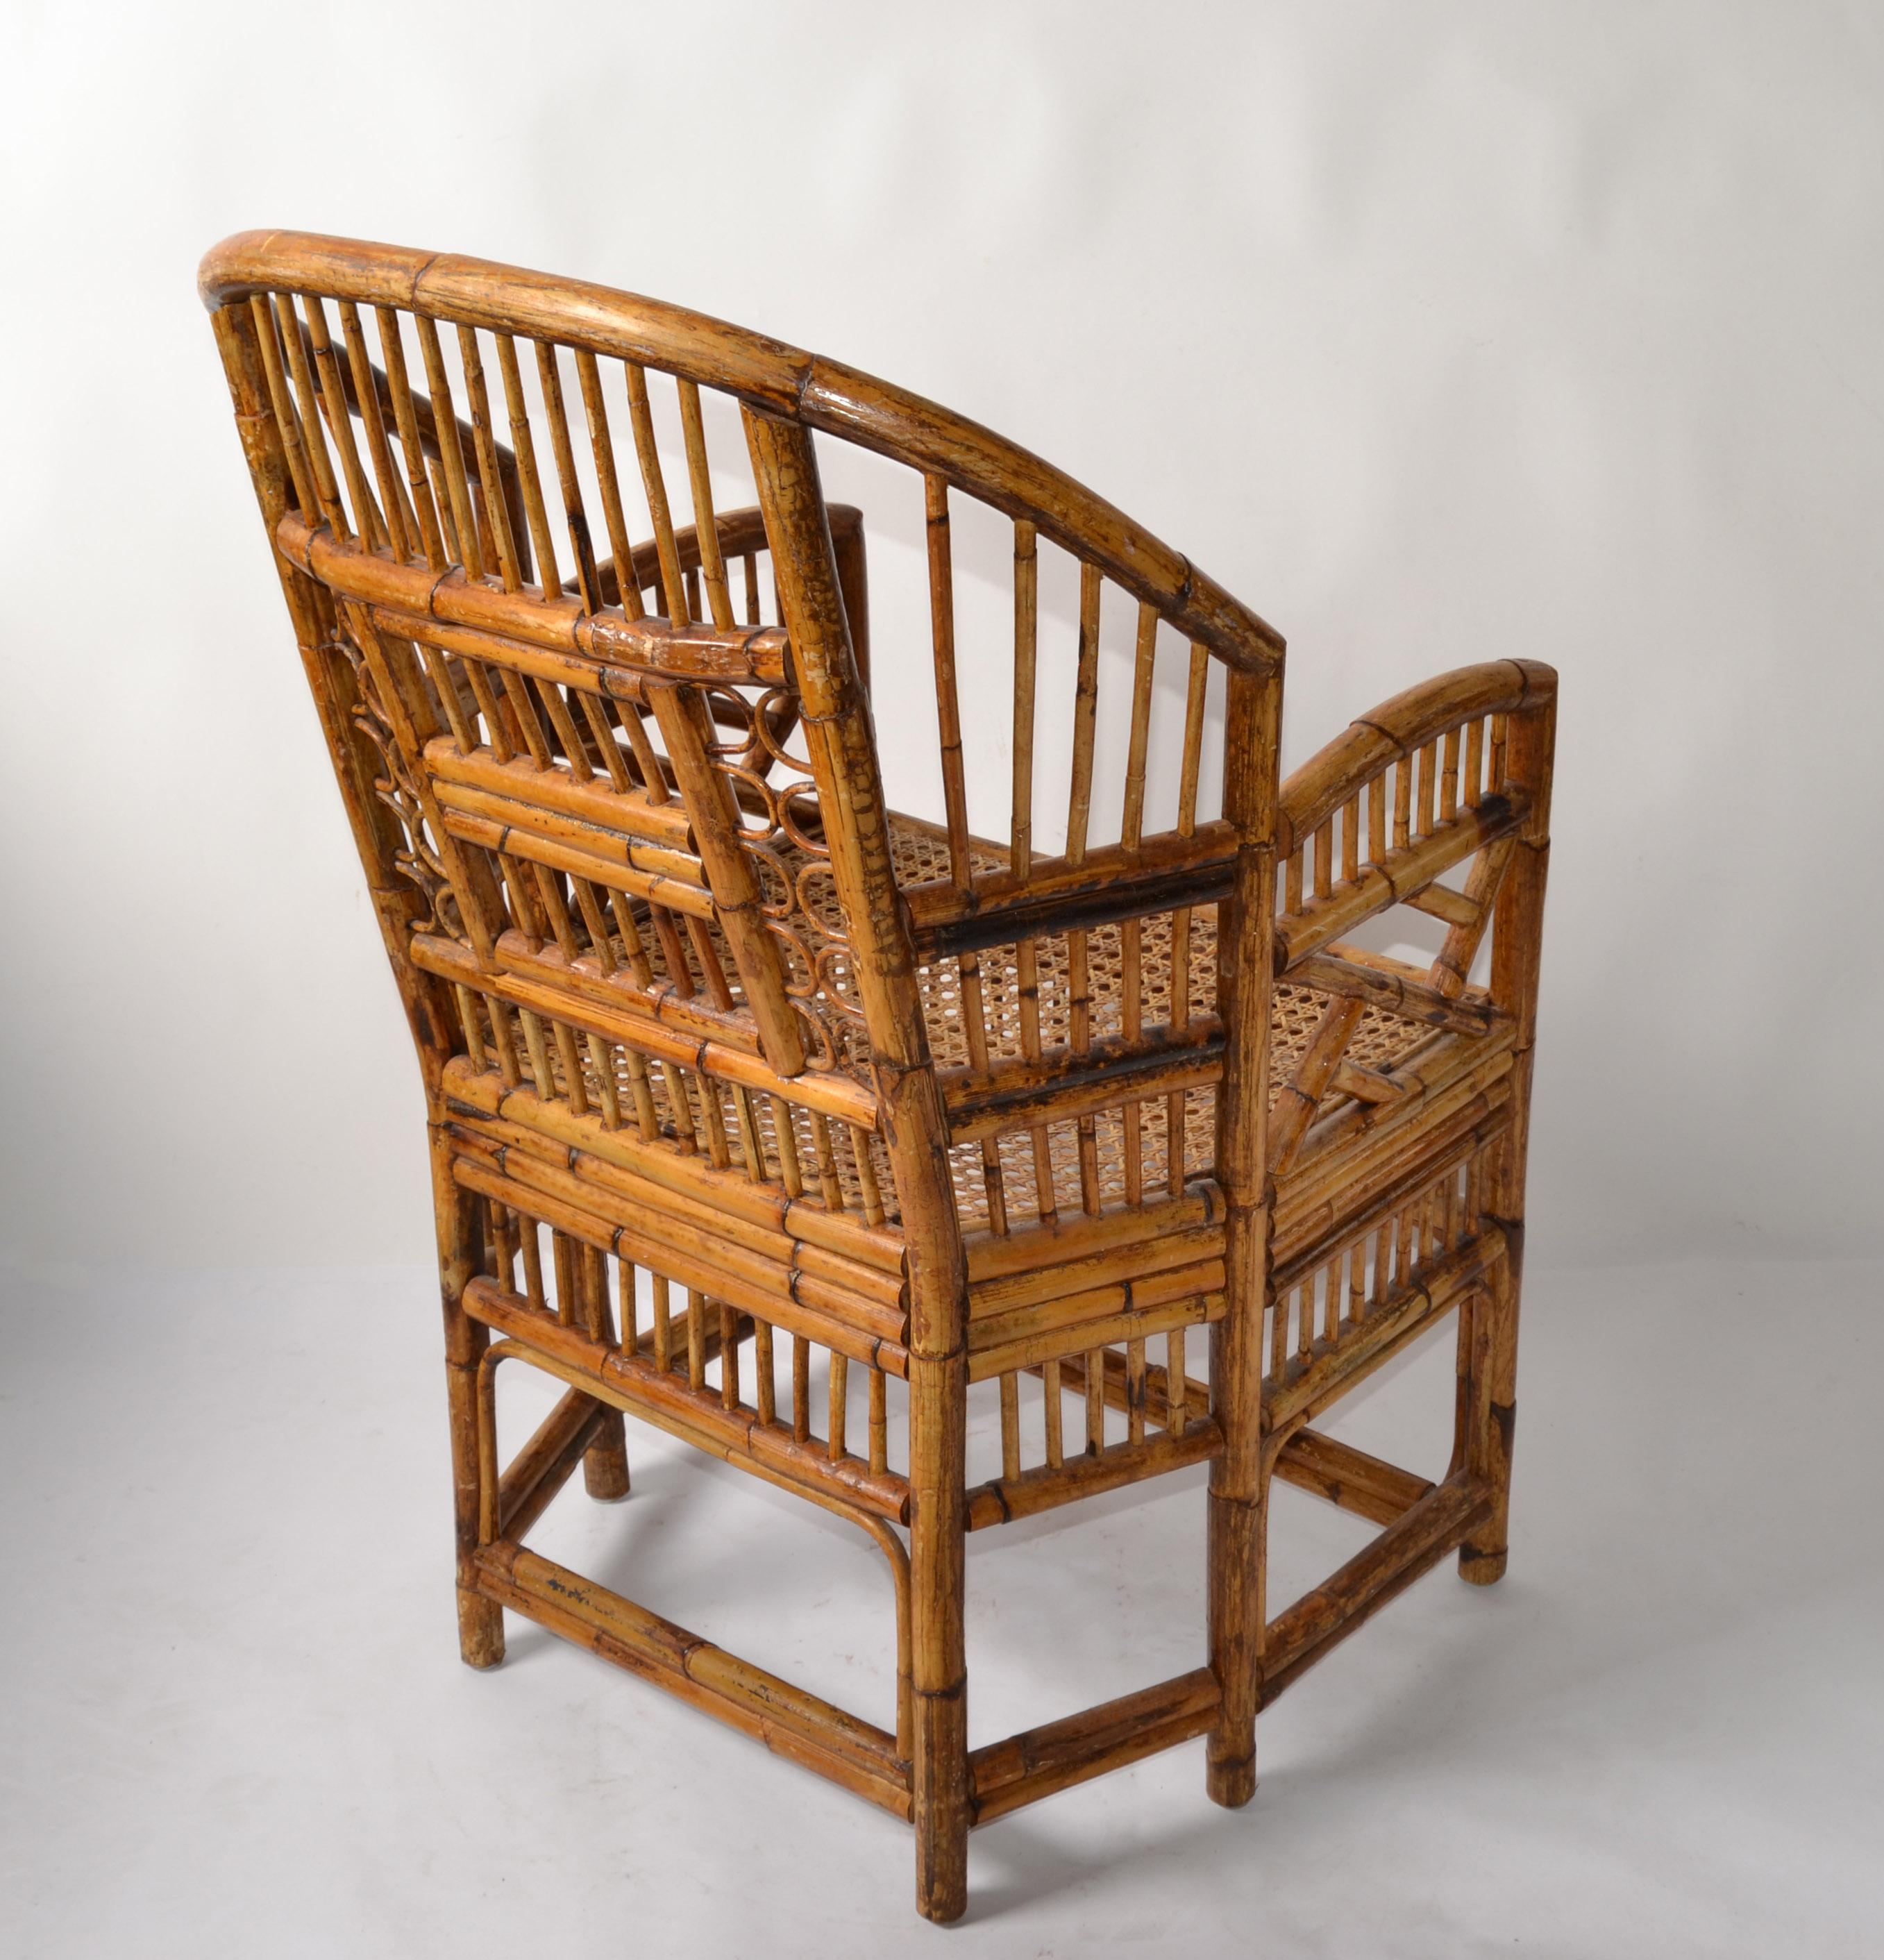 1970 Vintage Brighton Chinoiserie Rattan Burnt Bamboo Caning Split Reed Armchair For Sale 1